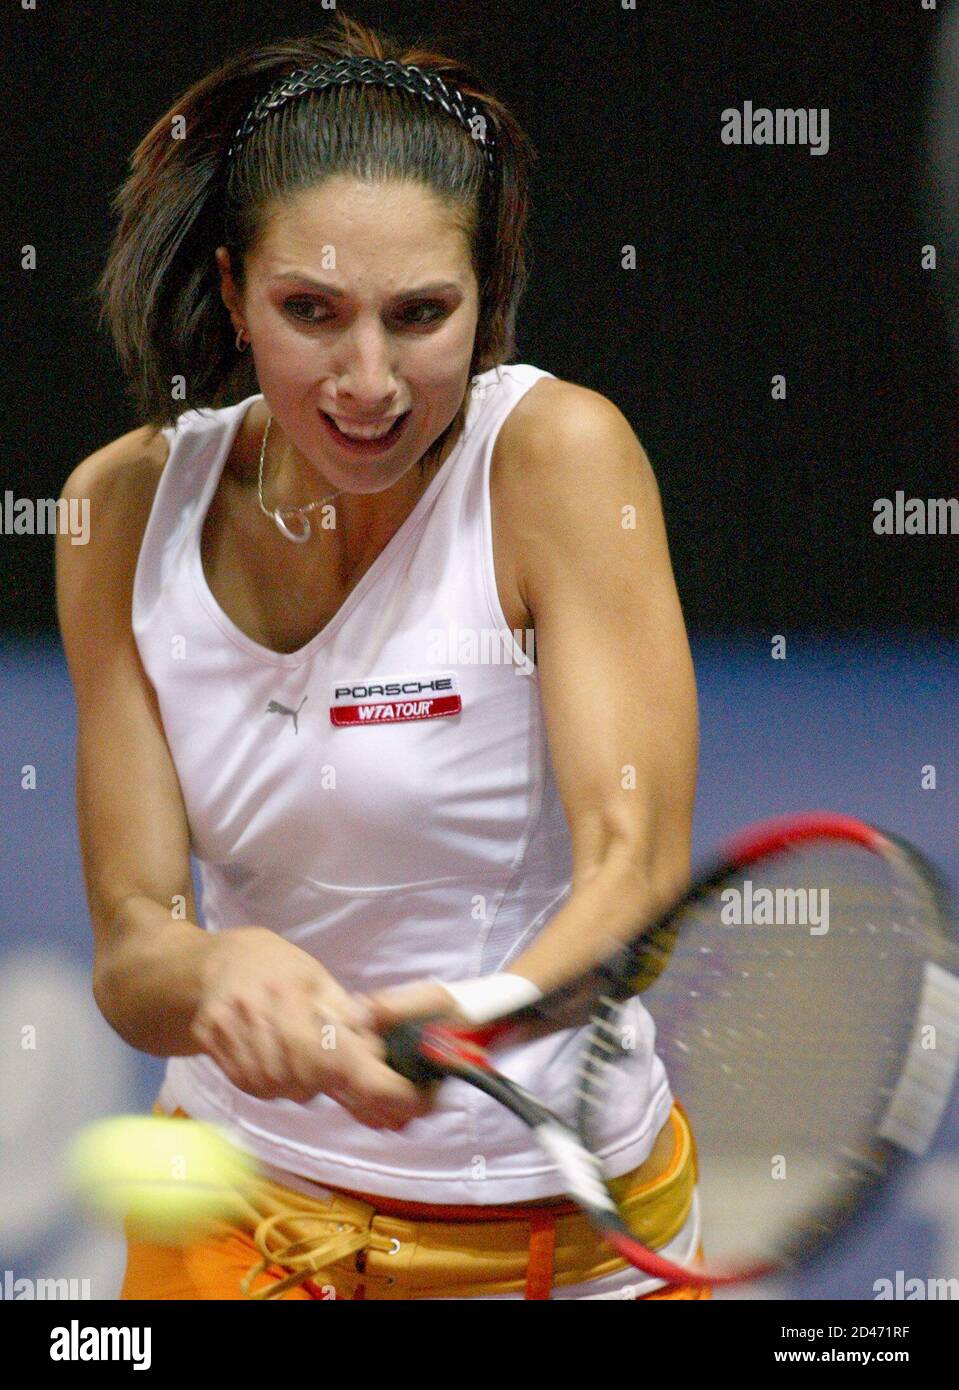 Anastasia Myskina of Russia returns the ball to Karolina Sprem of Croatia  during their Federation Cup World Group first round match in Moscow April  26, 2003. Myskina won the match 6-1 3-6